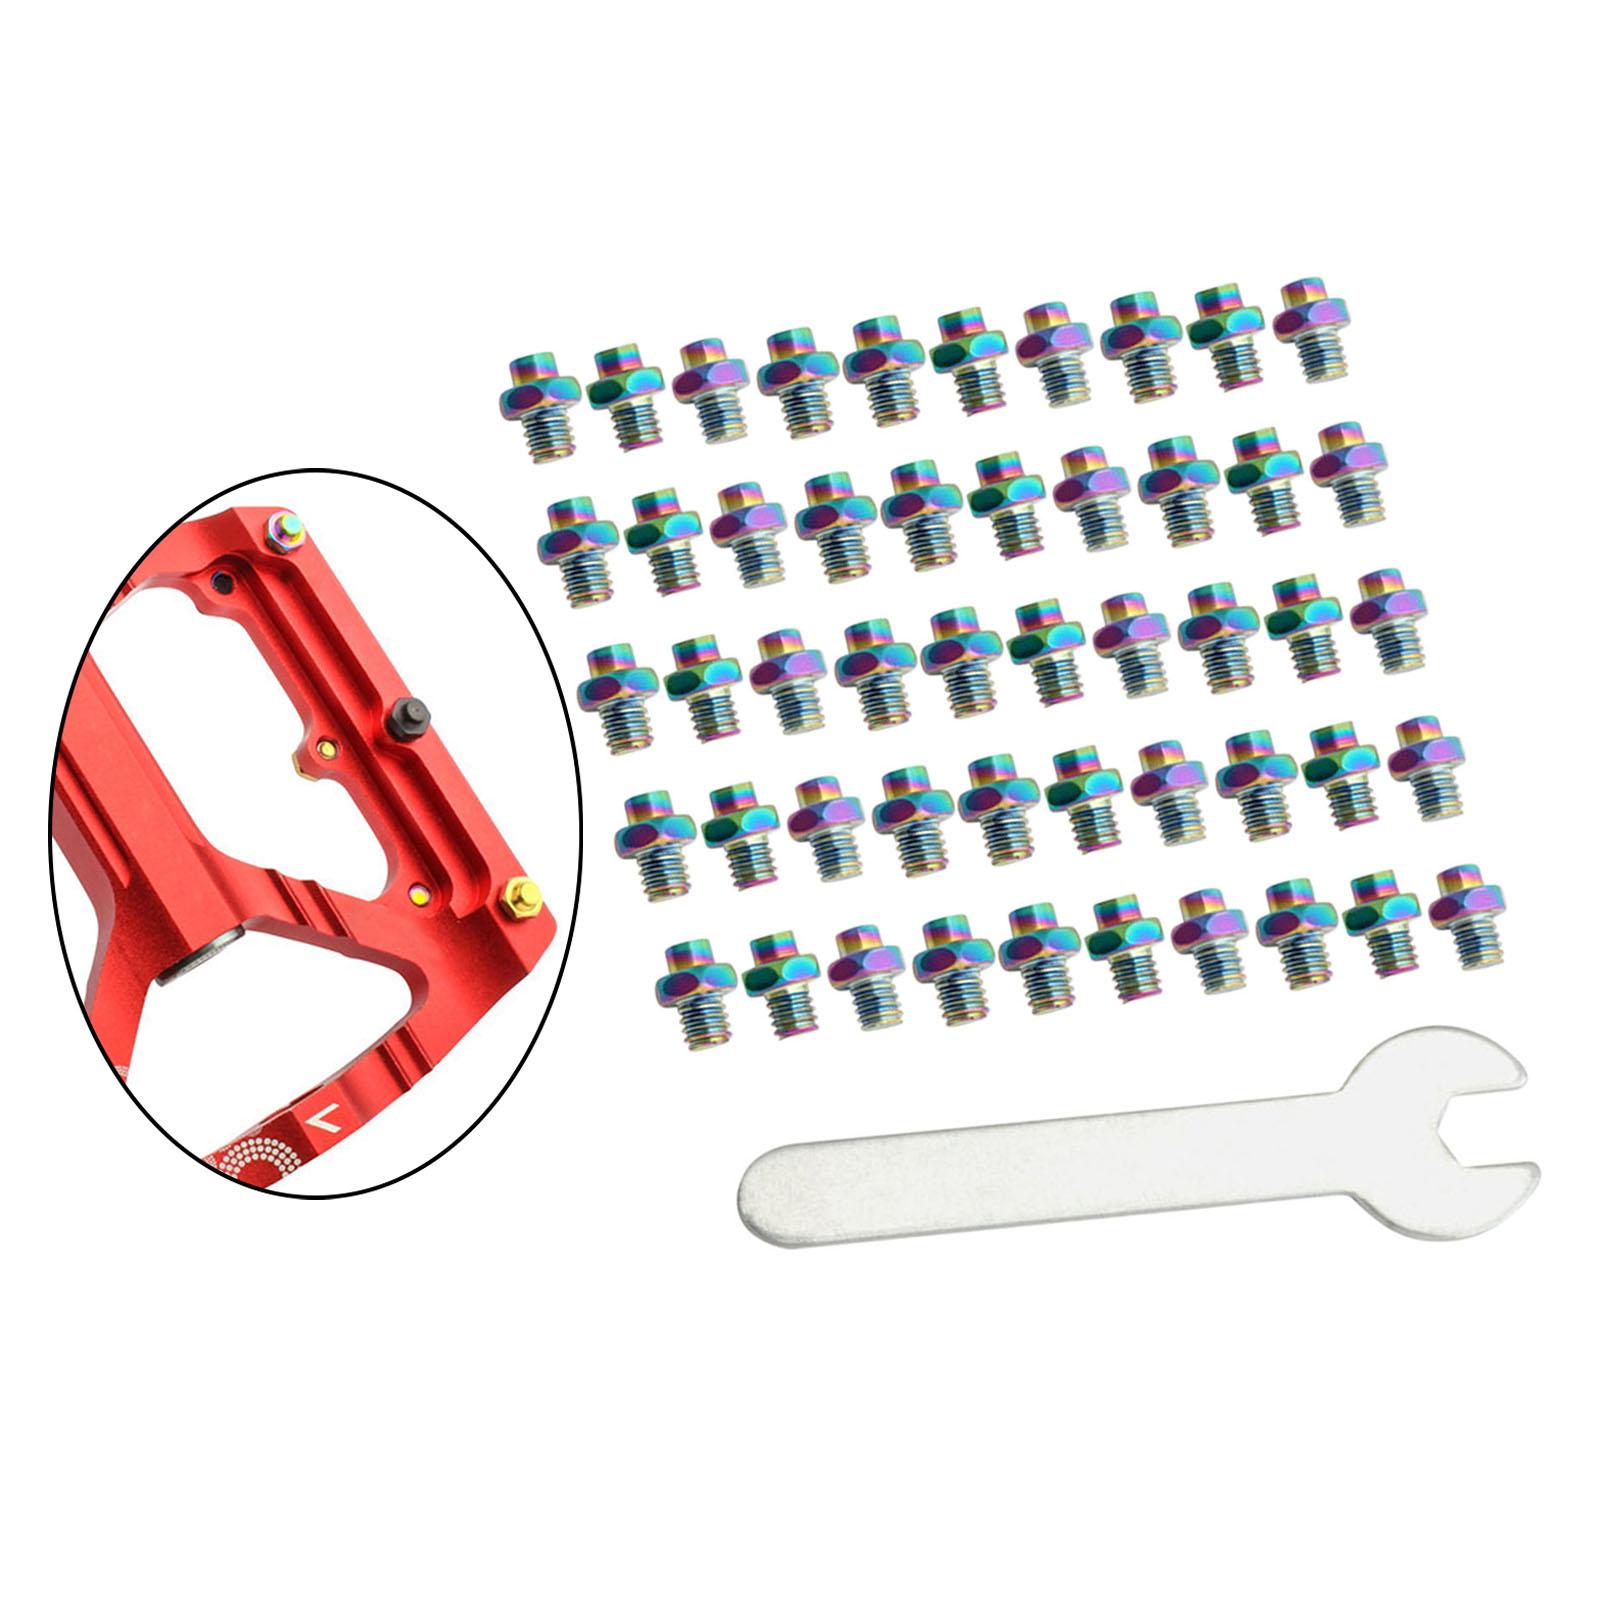 50 Pieces Stainless Steel Bike Pedal Screws Fixed Studs Anti-Slip Bolts Accs Colorful